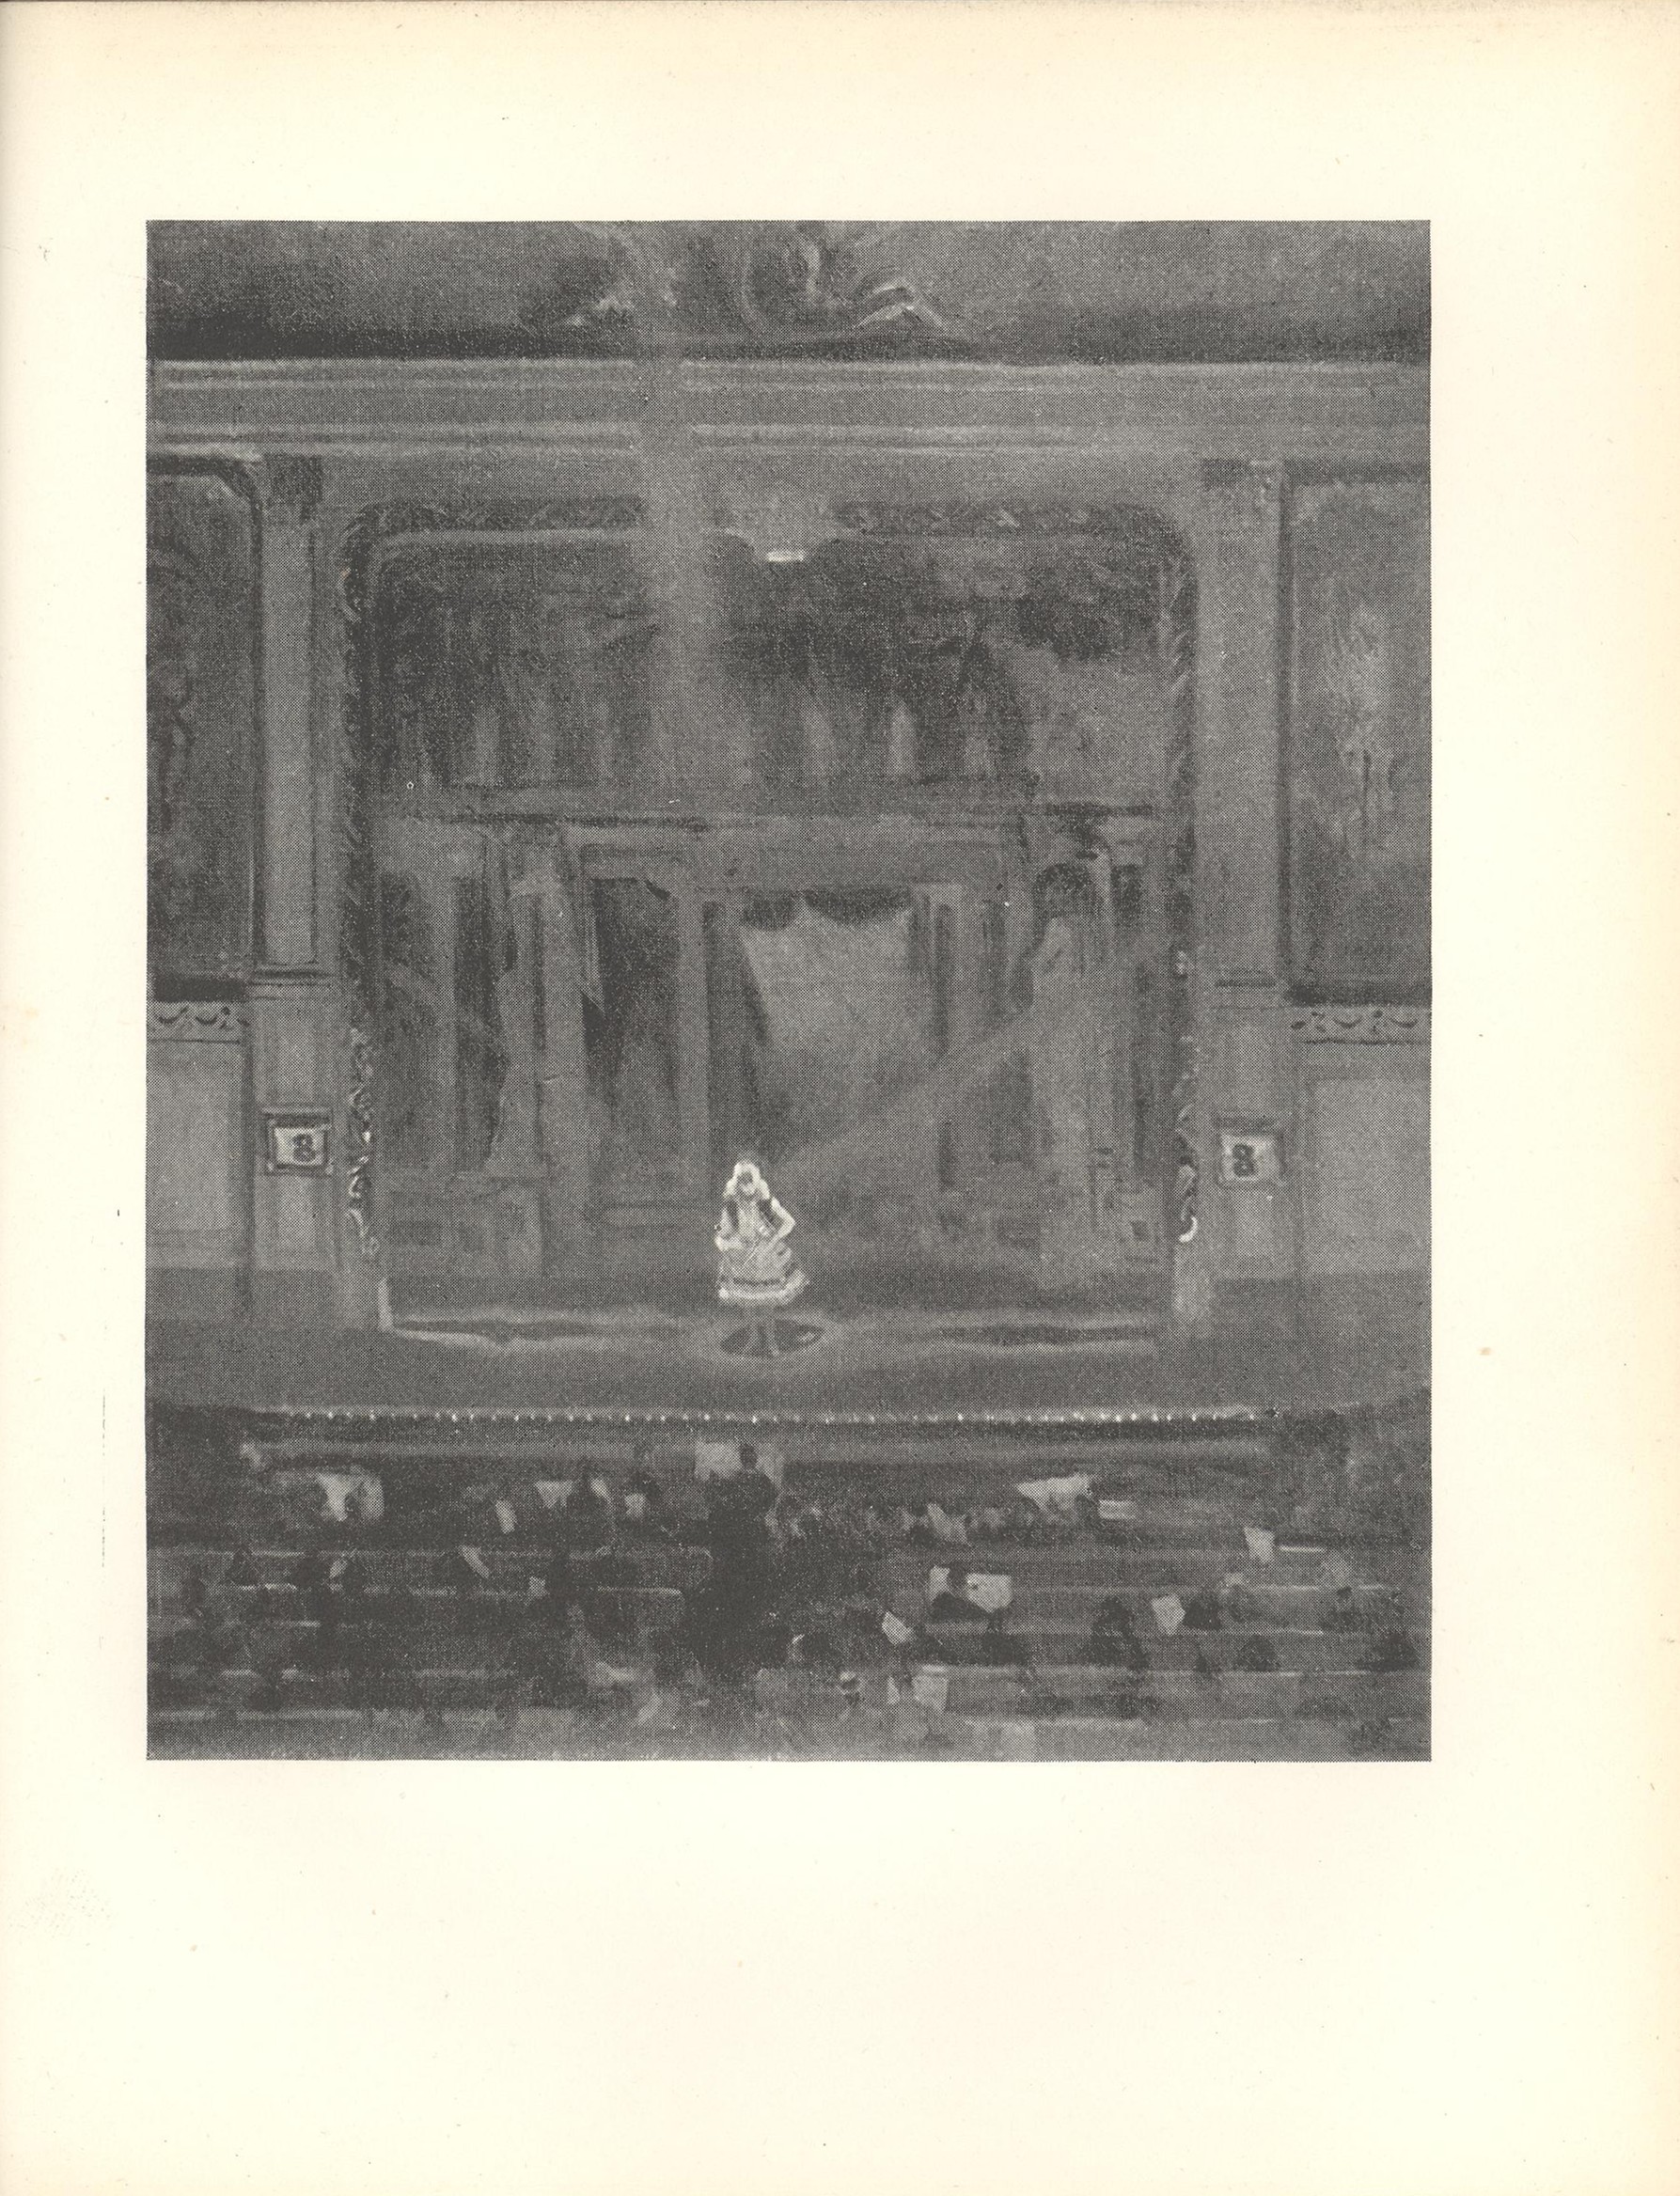 Image is of a music hall viewed from the back of the theatre. The stage divides the frame into three sections The central and largest section is the performance area where a small blonde woman wearing a short white dress is standing on a proscenium stage The theatrical facade behind the woman contains many curtains and lights The upper section at the extreme top of the image is of some moulding over centre stage The lower section of the image is comprised of several rows of audience members the orchestra pit and the conductor The image is vertically displayed